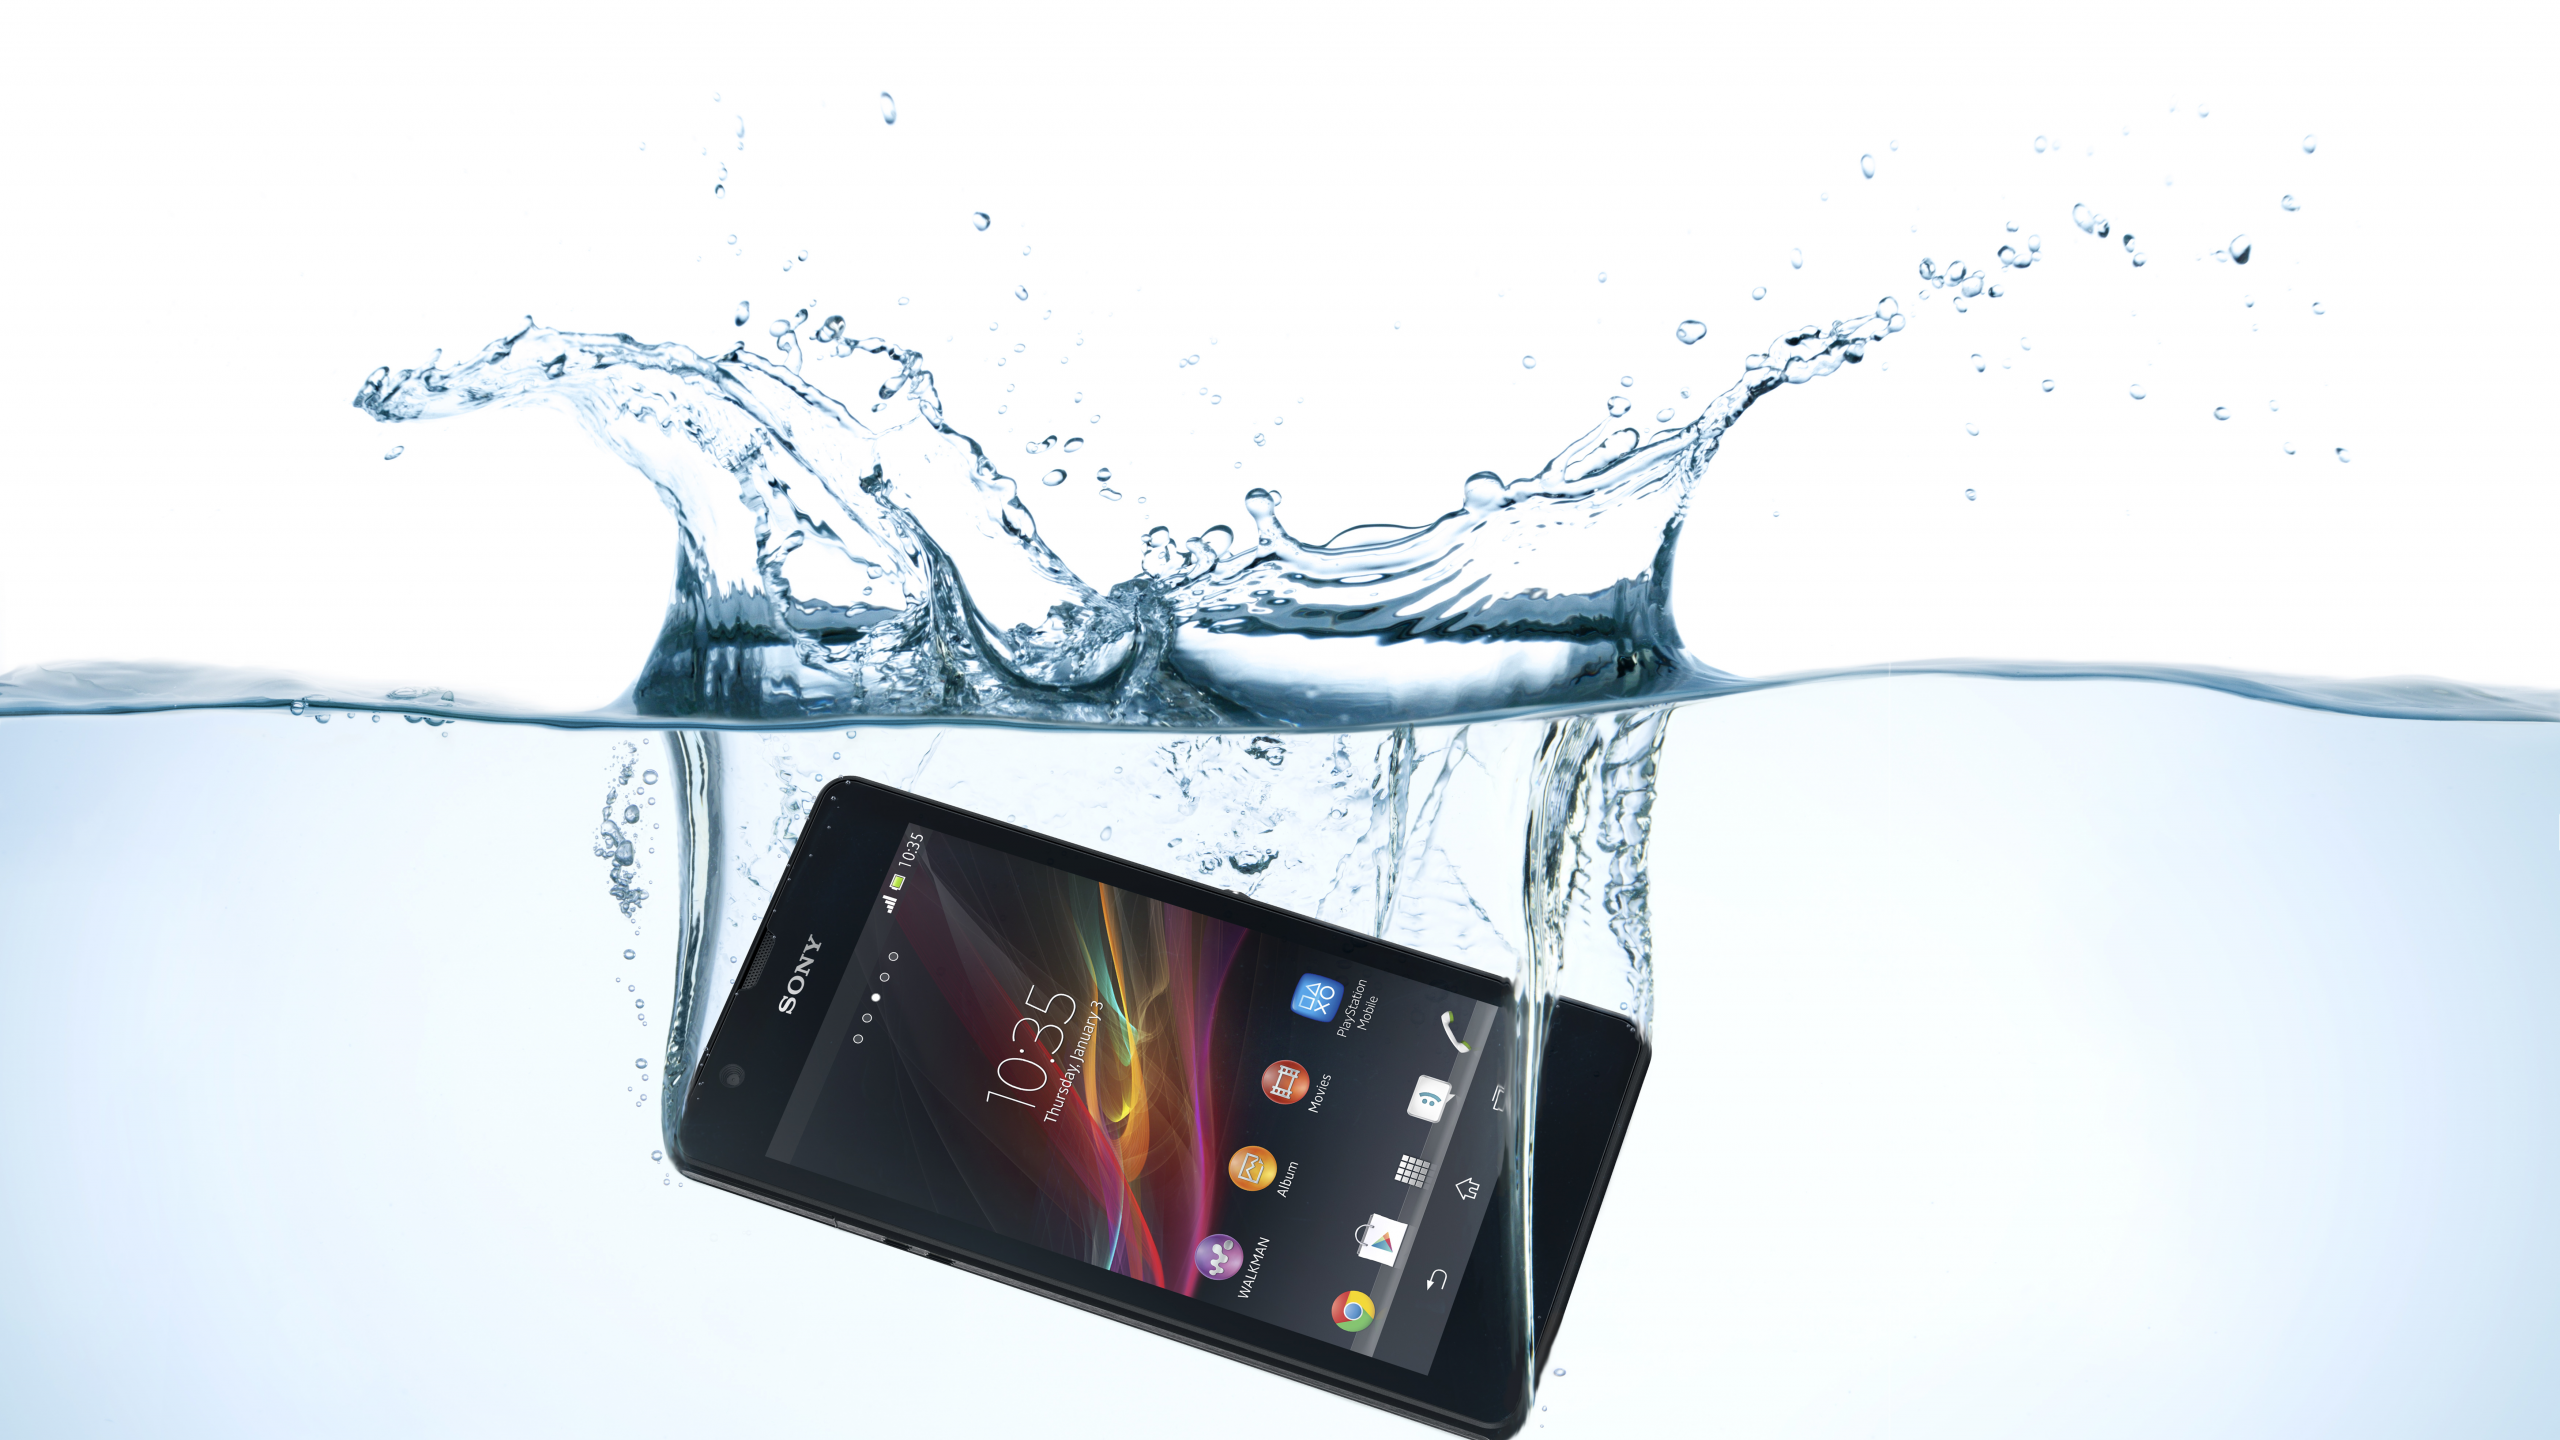 Sony, mobile, xperia, zr, water